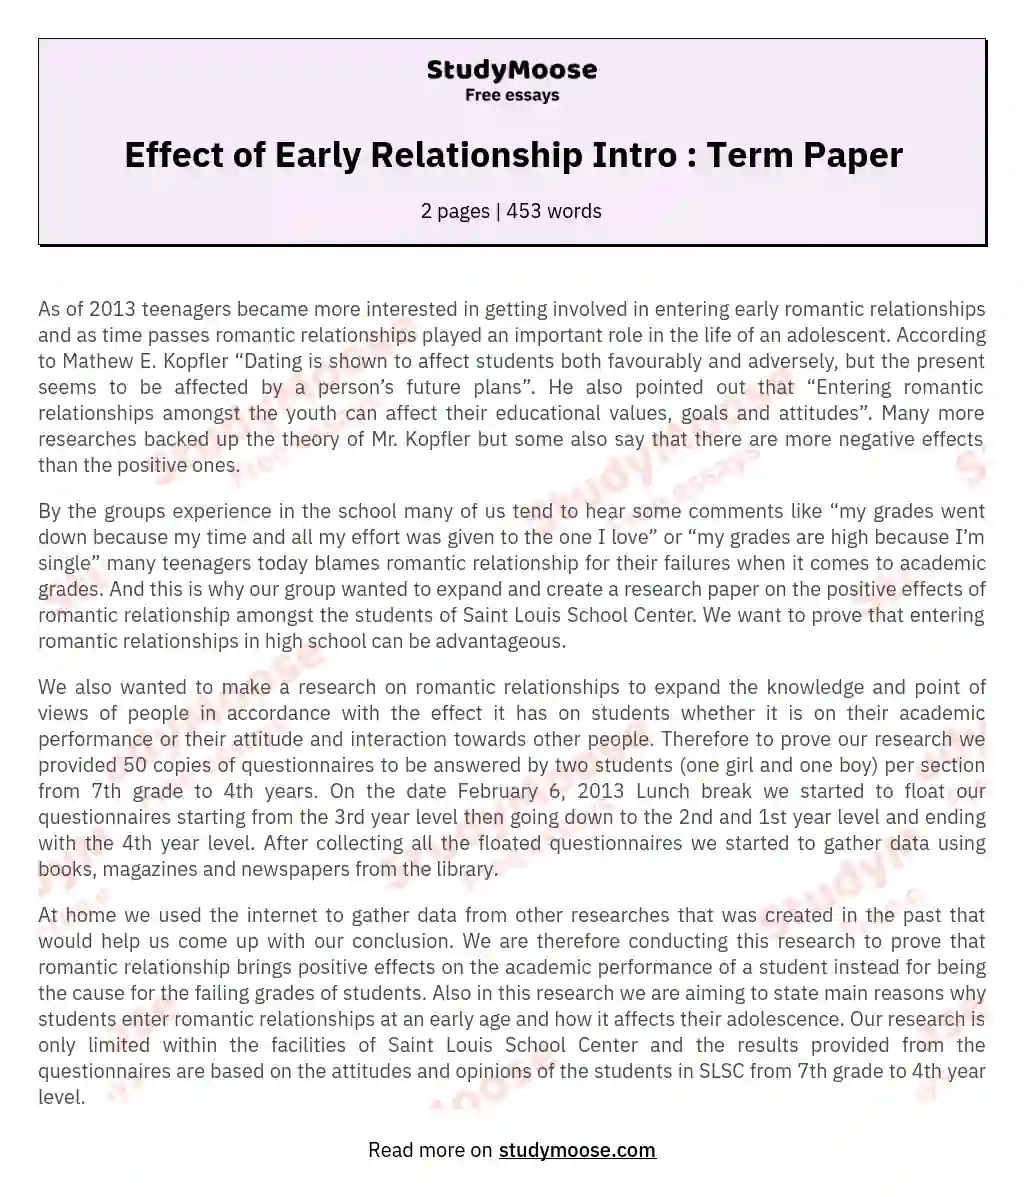 Effect of Early Relationship Intro : Term Paper essay